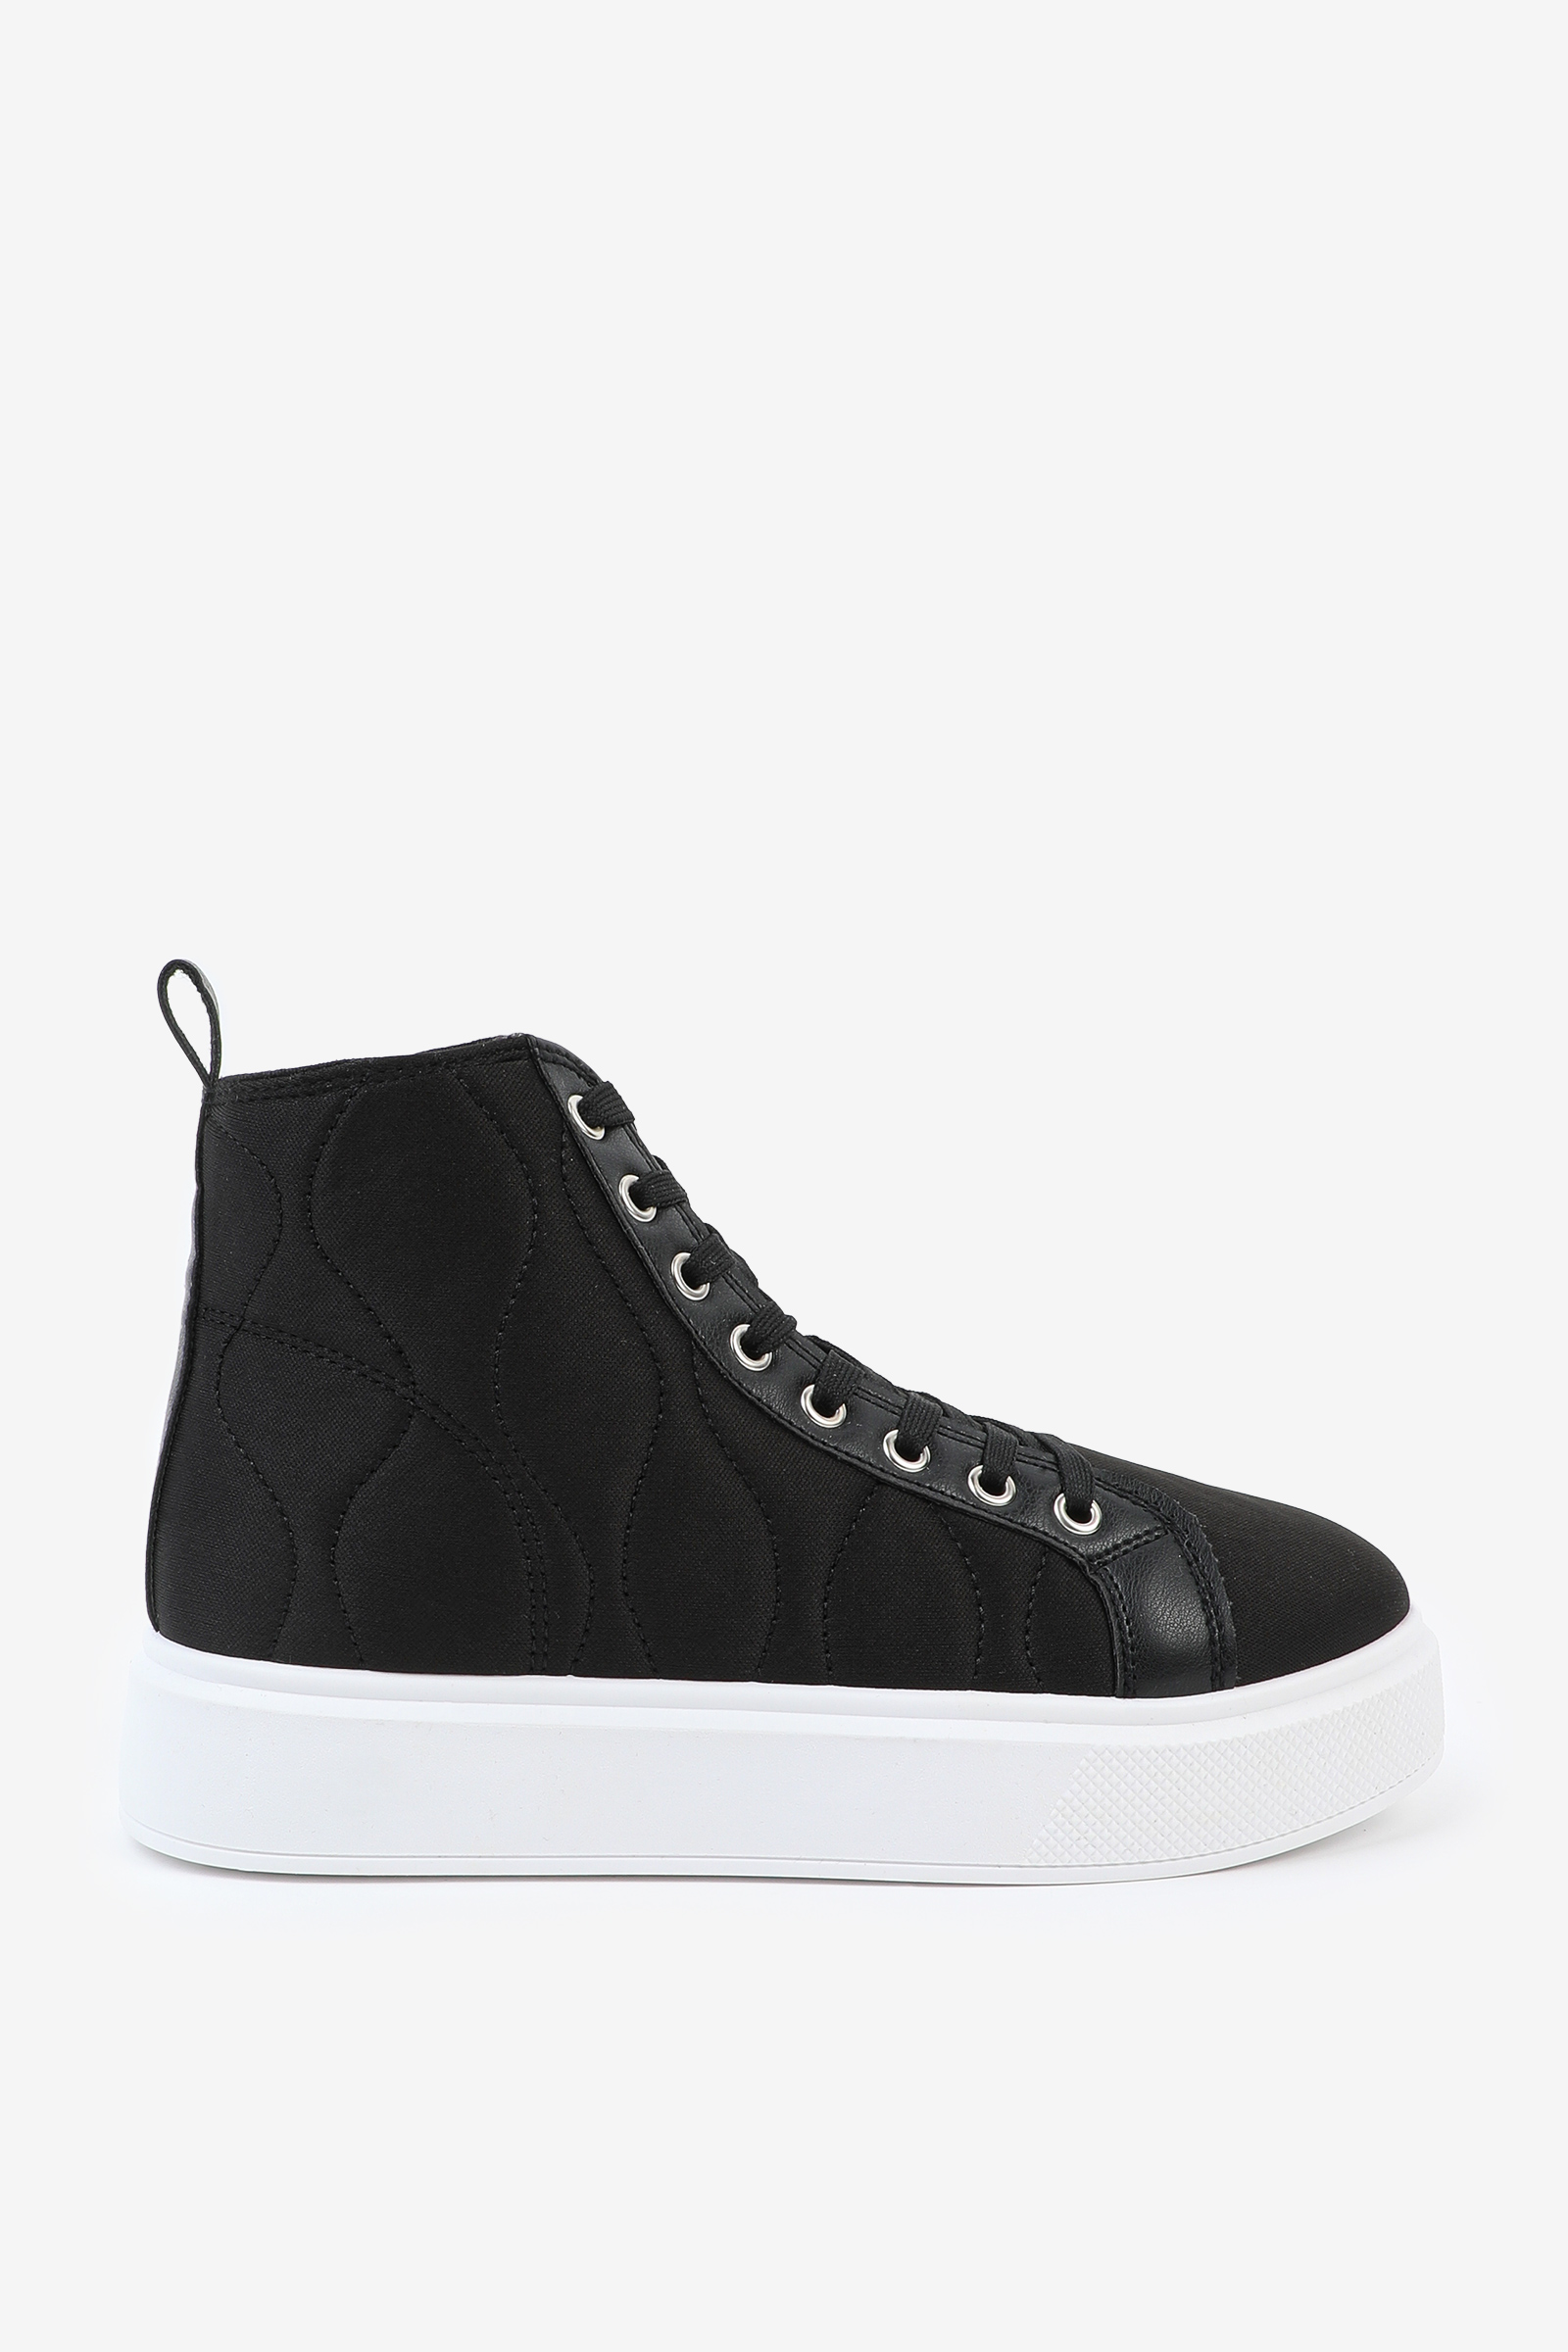 Ardene Quilted Nylon High Top Sneakers in Black | Size 6 | Nylon/Rubber